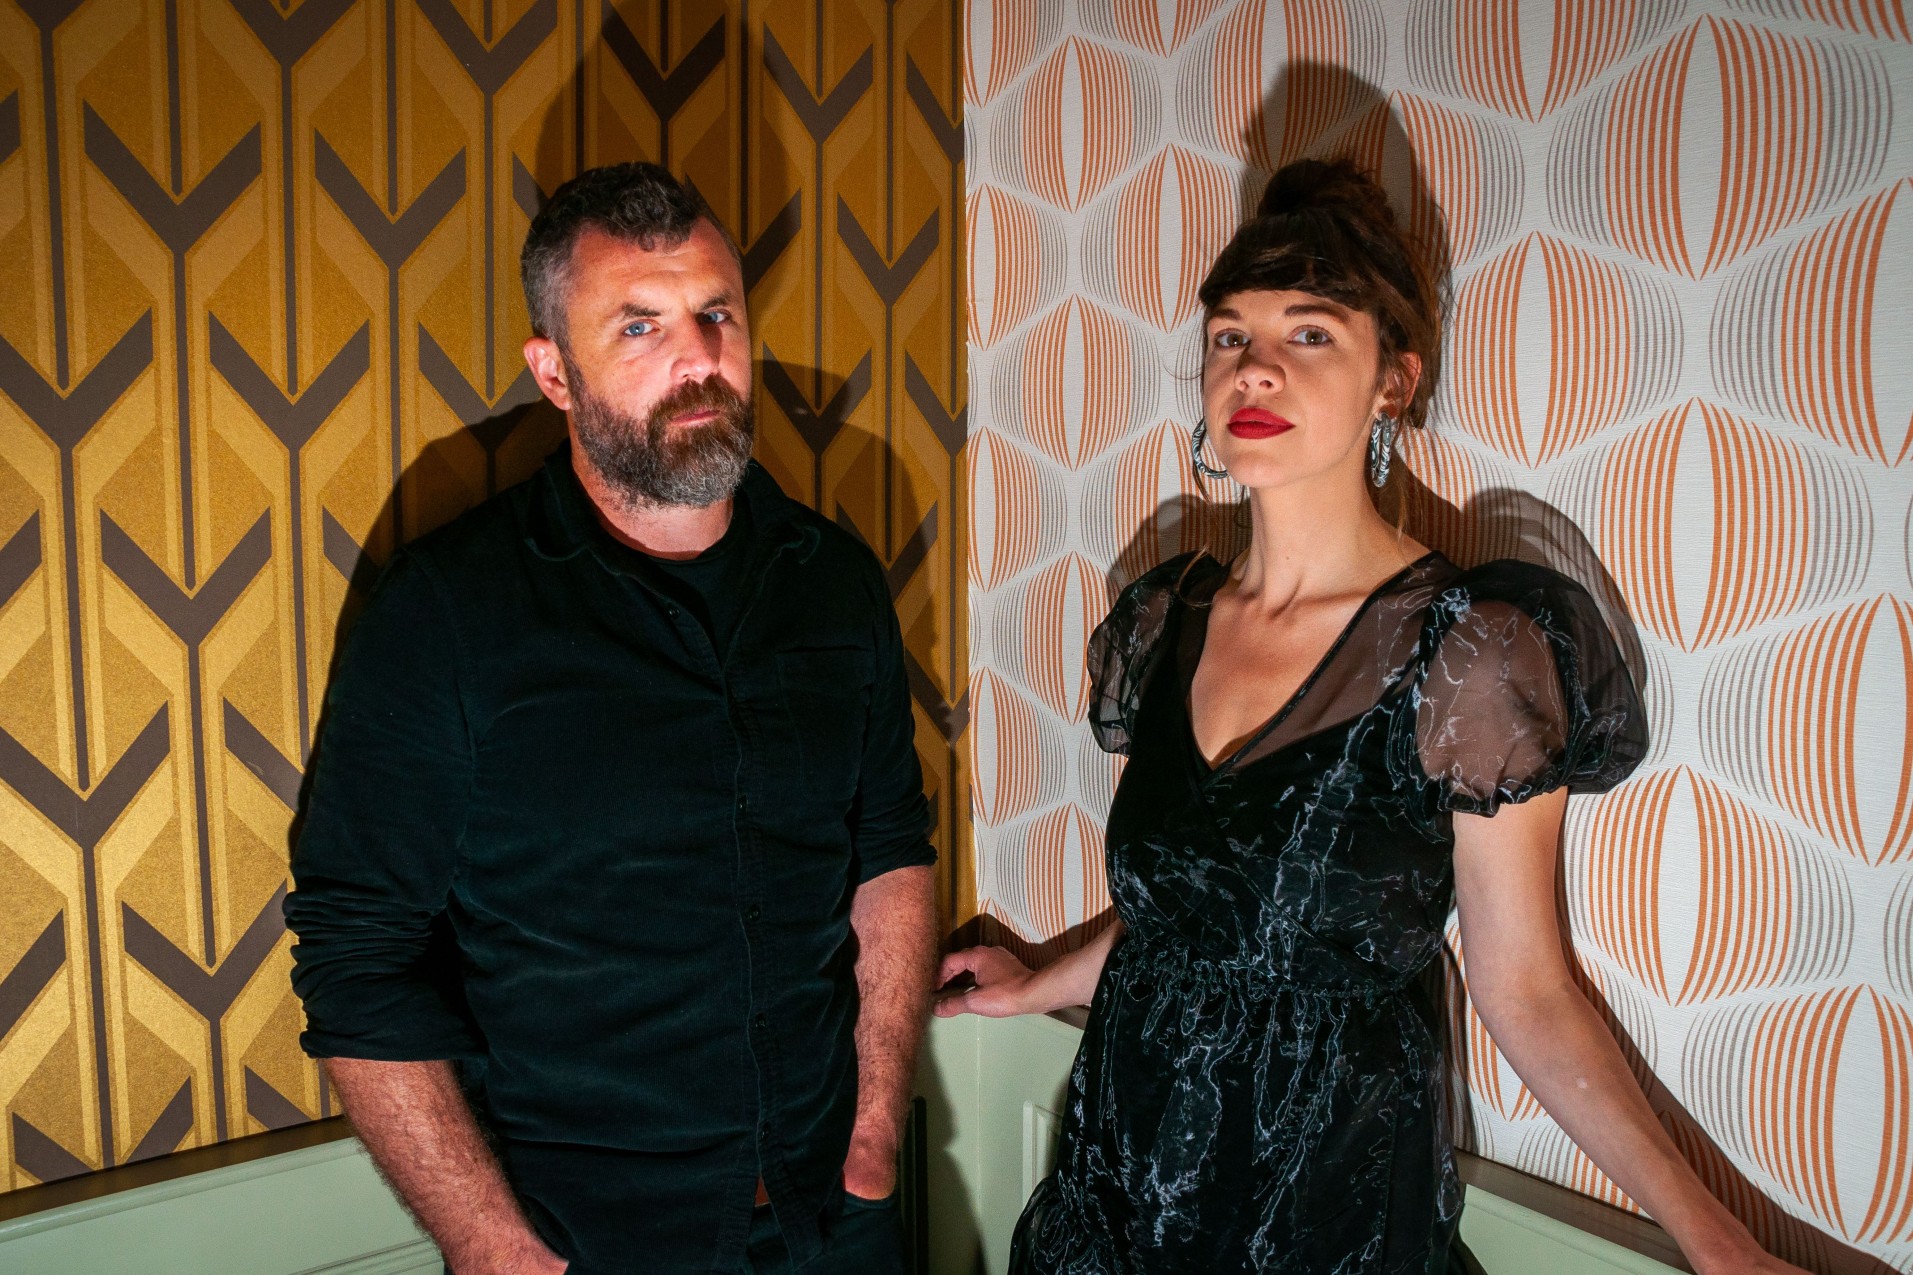 New Album from Mick Flannery & Susan O'Neill 'In the Game'